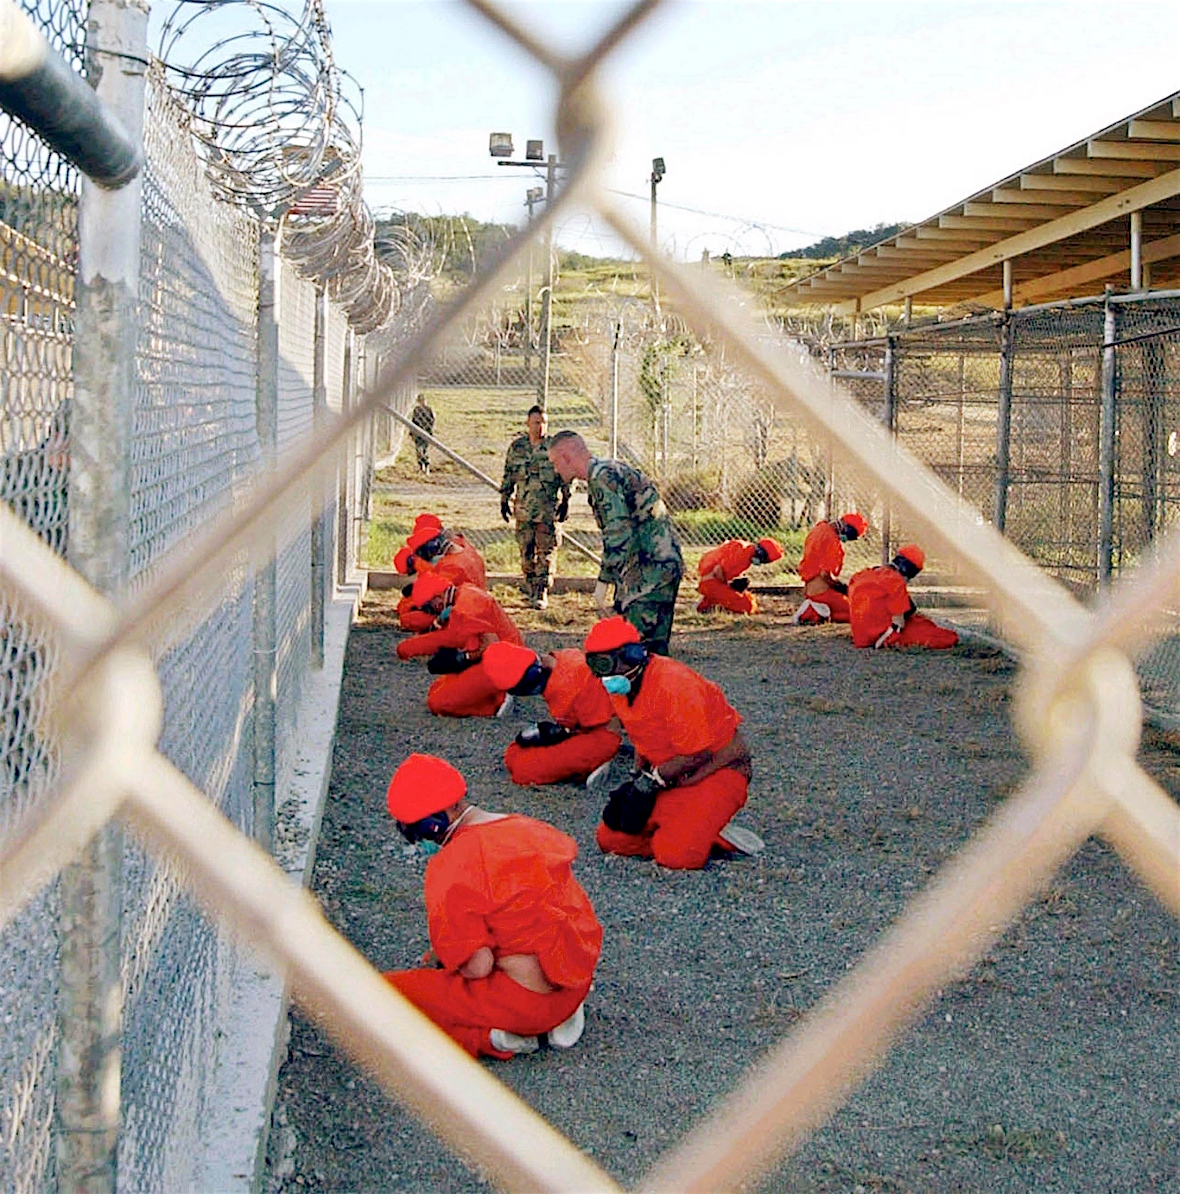 One of the photos taken on the day Guantanamo opened, January 11, 2002, by Shane T. McCoy of the US Navy.